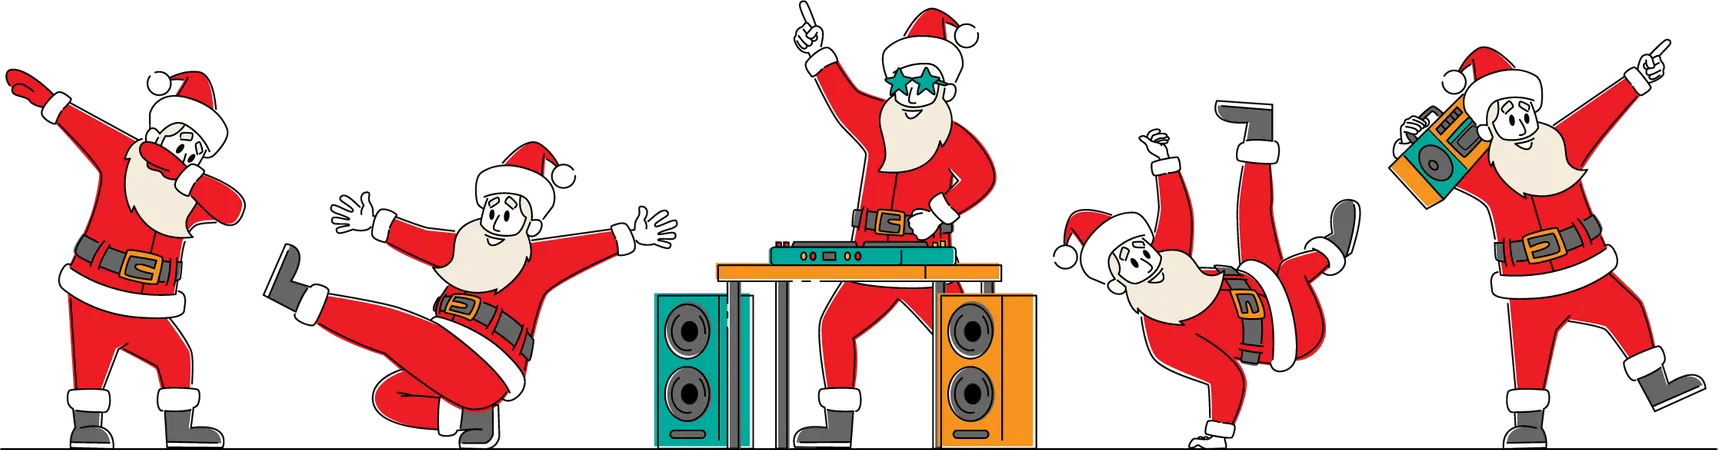 Funny Santa Claus Dancing Funny Christmas Characters Making Dab Move Dance Break And Hip Hop Style Dance Young Teenage Culture Holiday Greeting DJ Club Party Linear People Vector Illustration Illustration